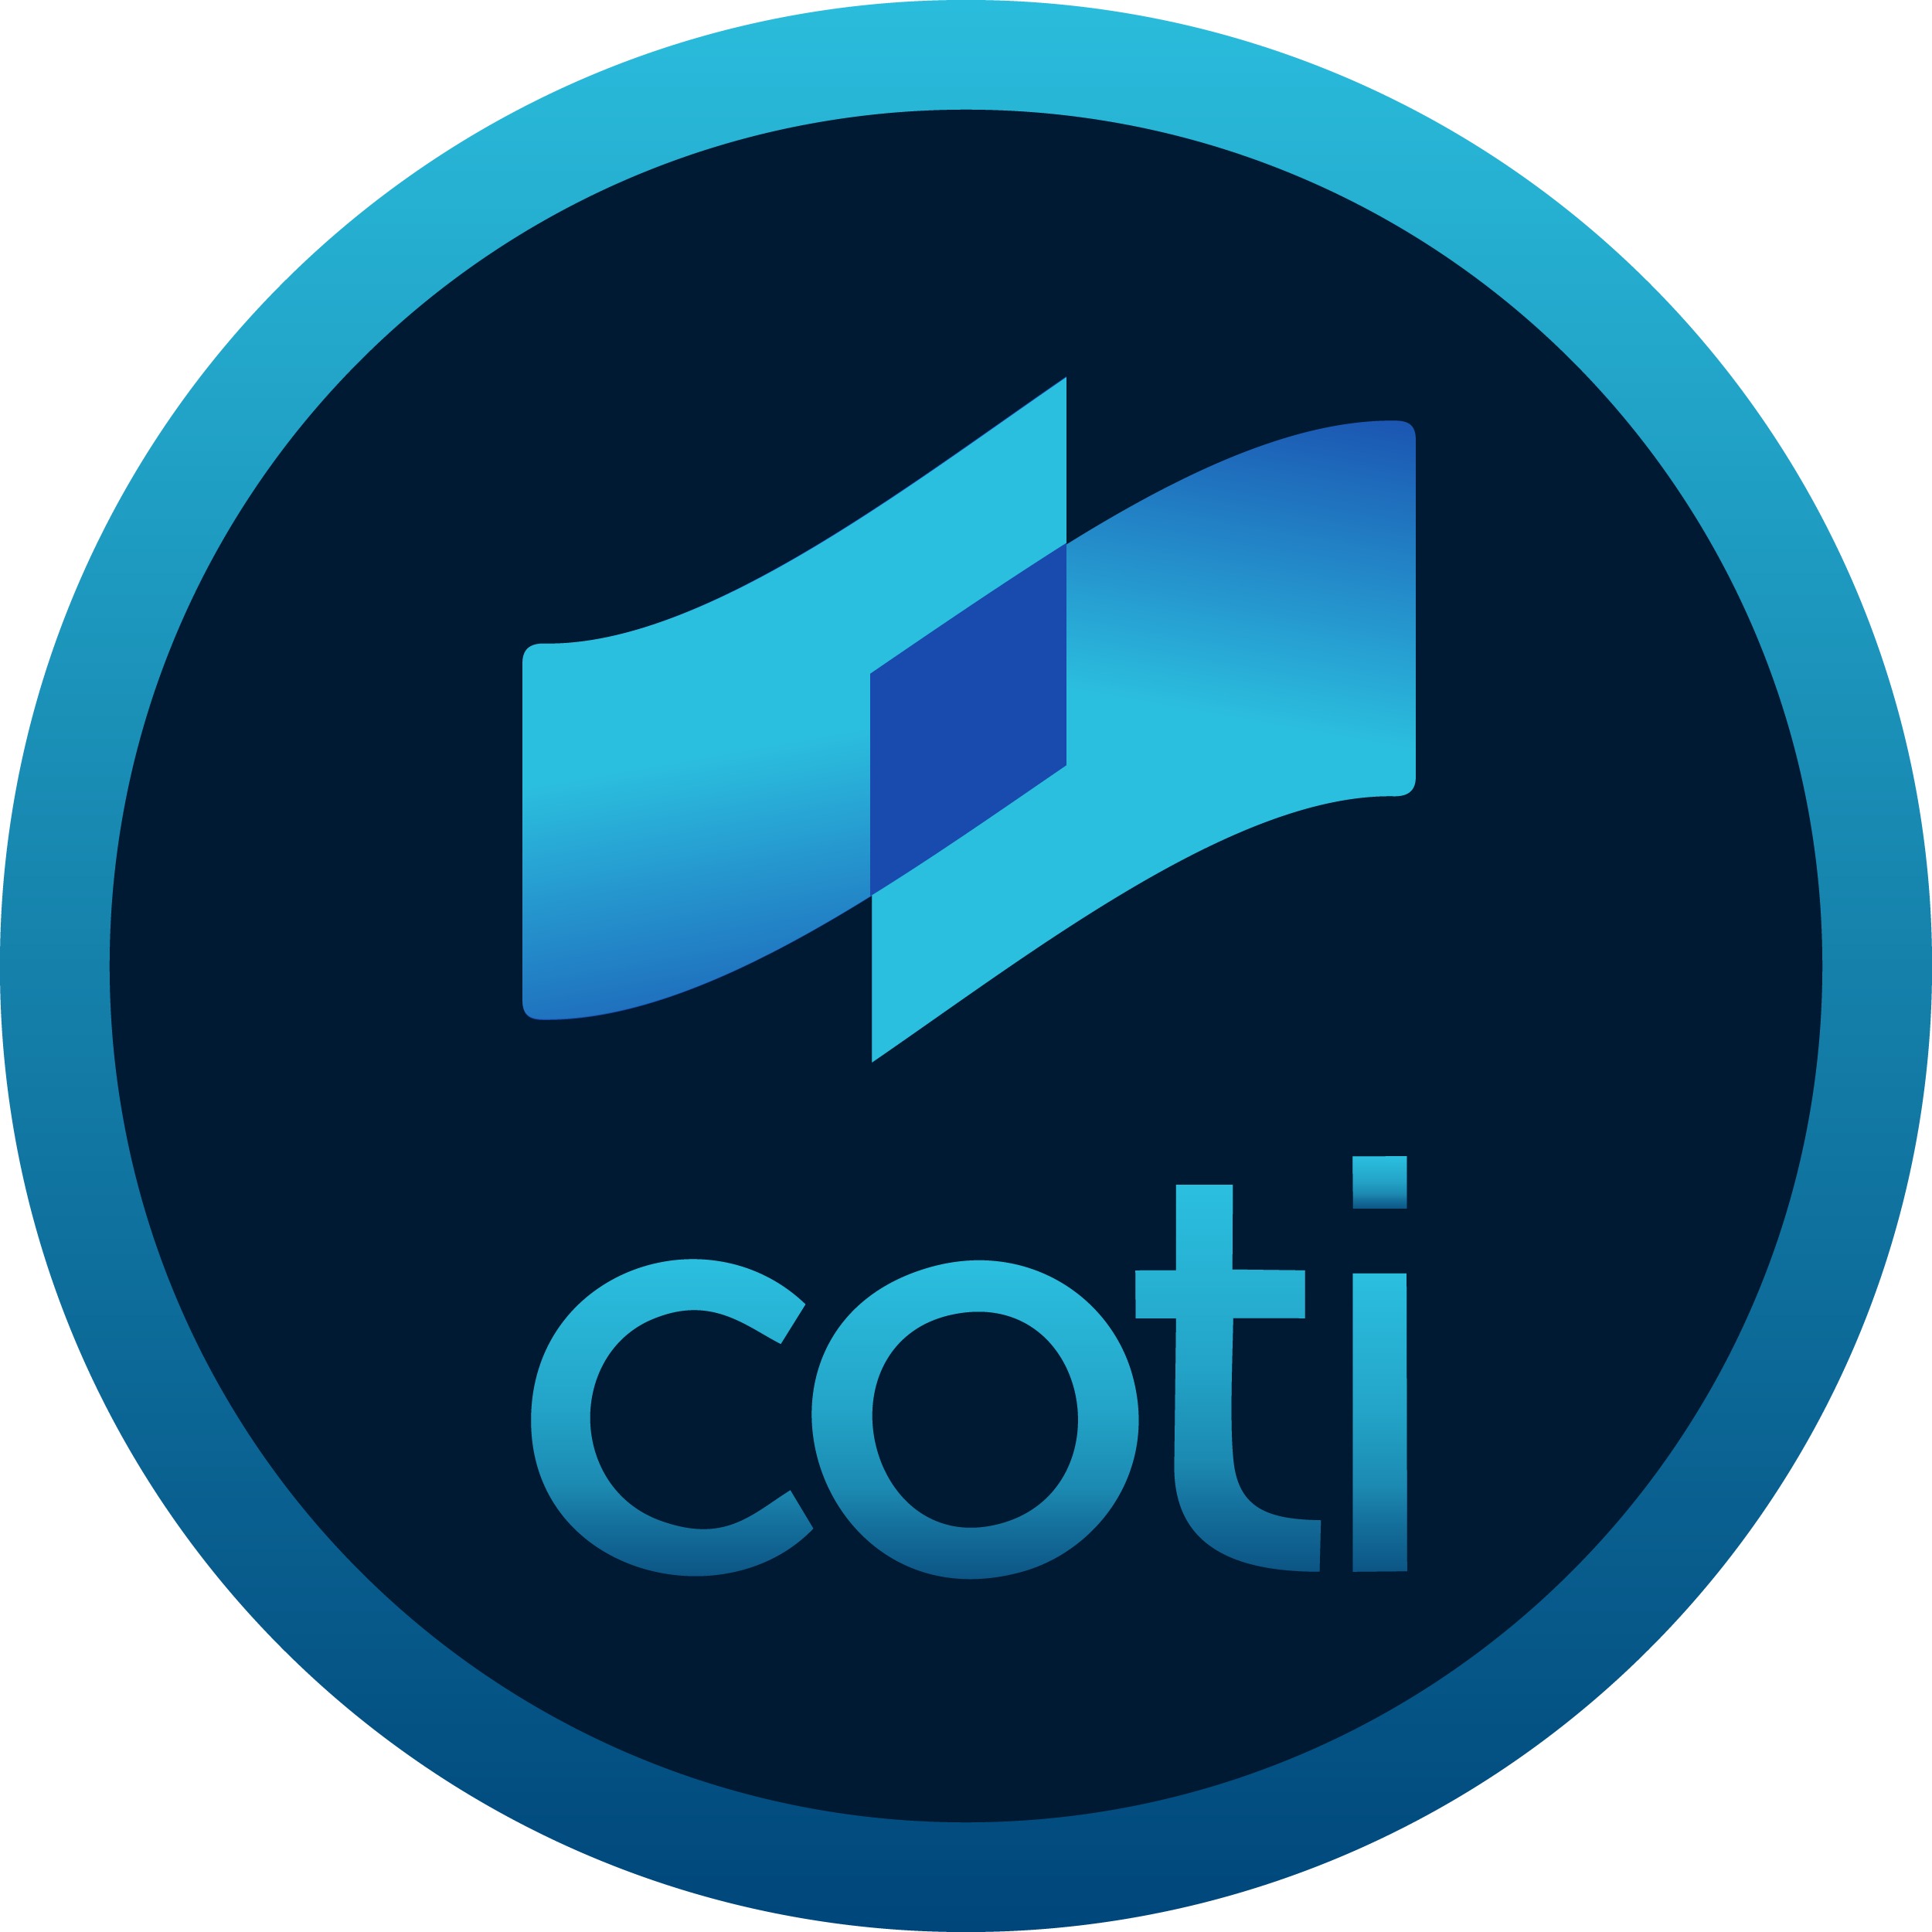 COTI price today, COTI to USD live price, marketcap and chart | CoinMarketCap